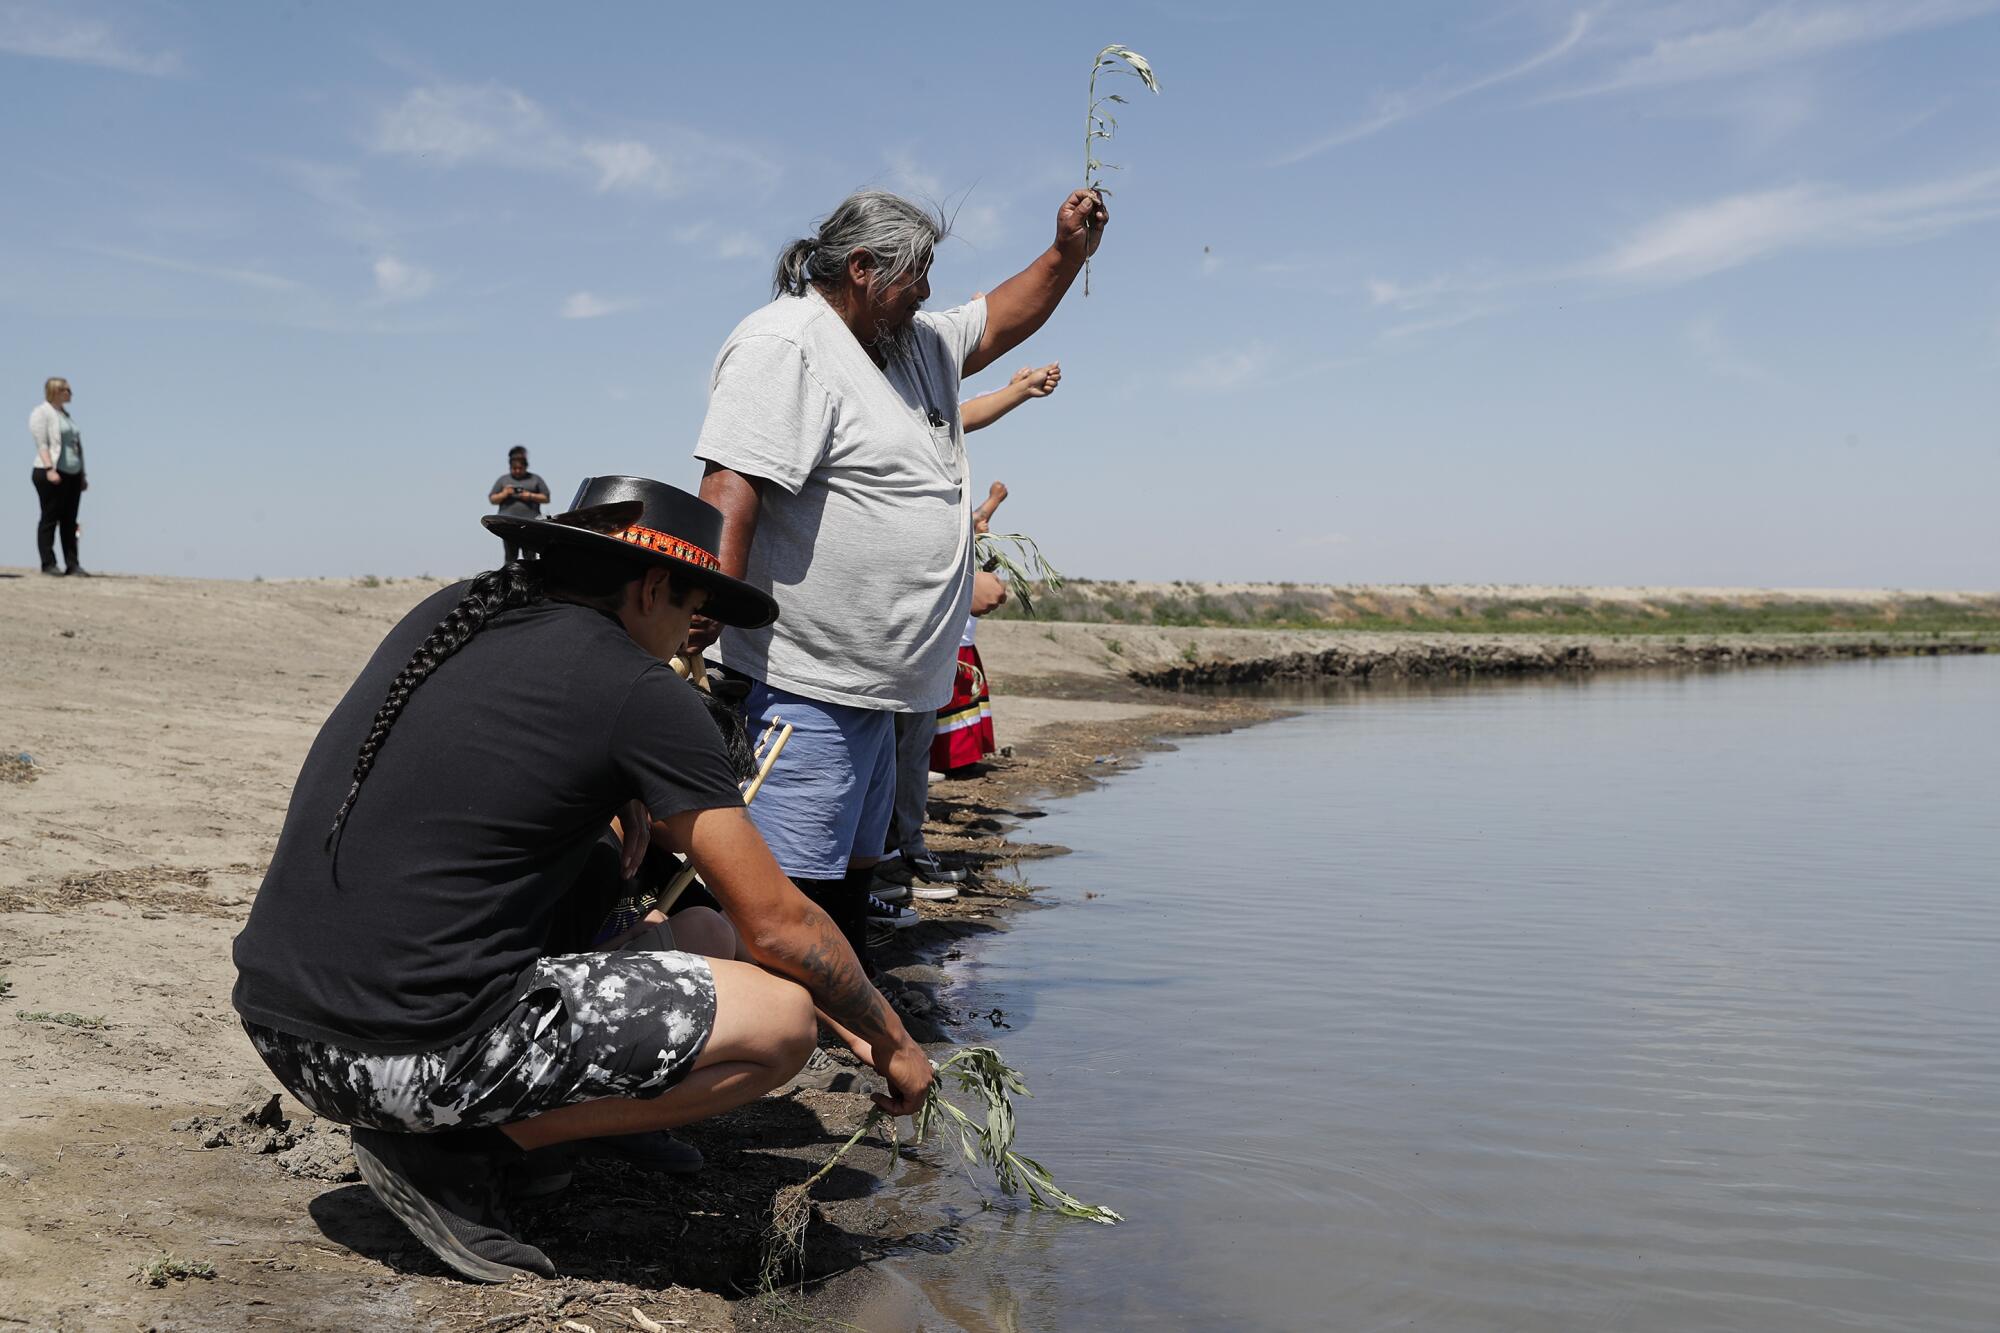 Yokut people from throughout the San Joaquin Valley participate in a ceremony at Tulare Lake.